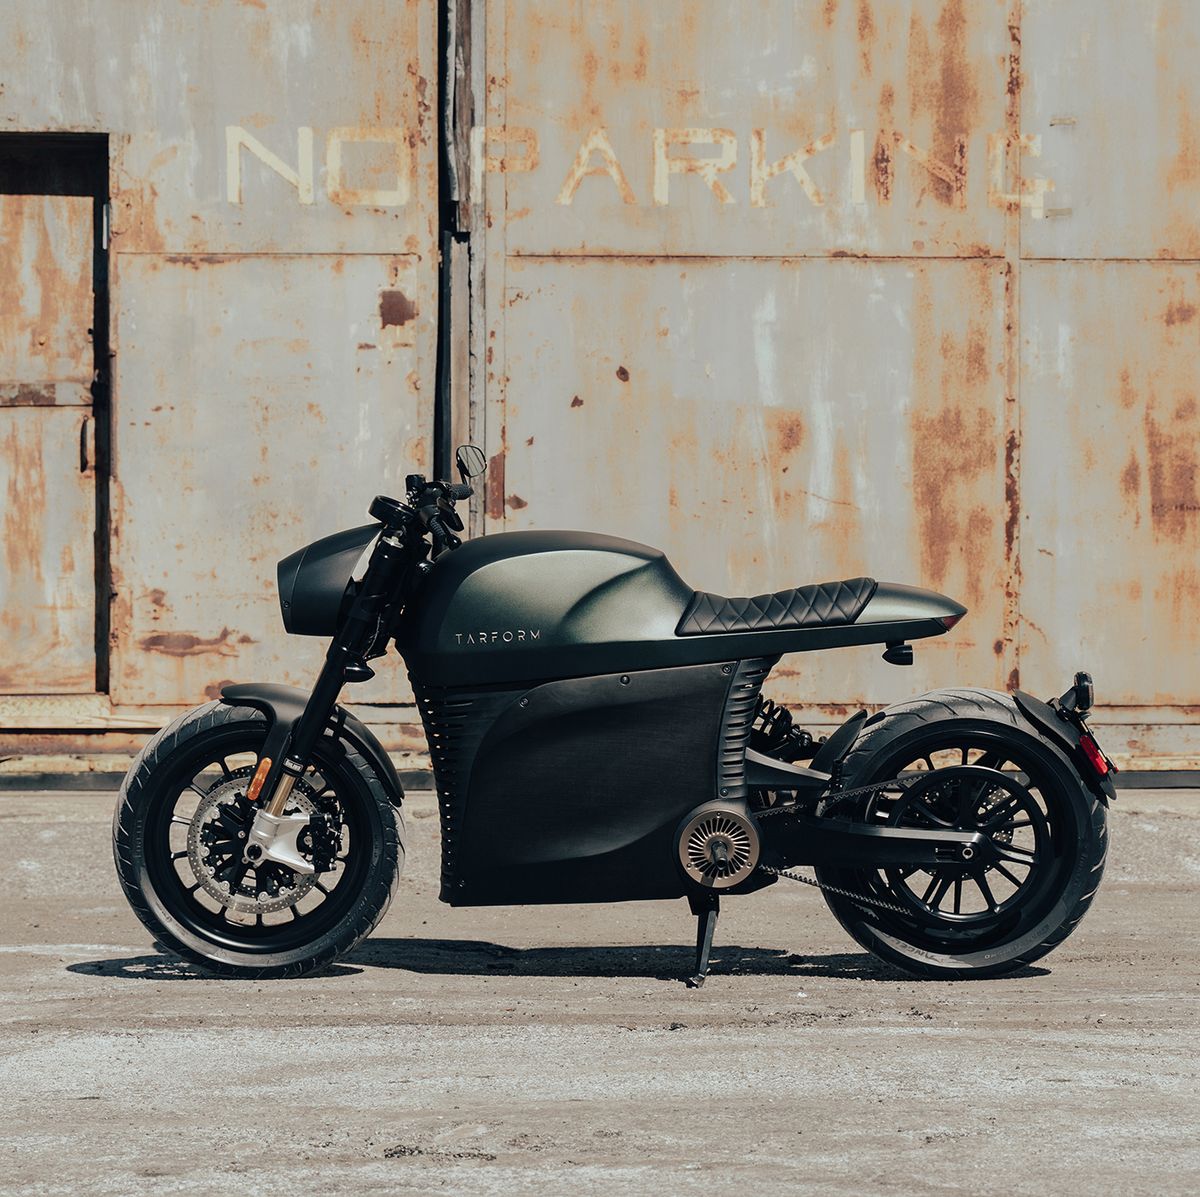 Racer-X: Testing the limits of electric motorcycle design